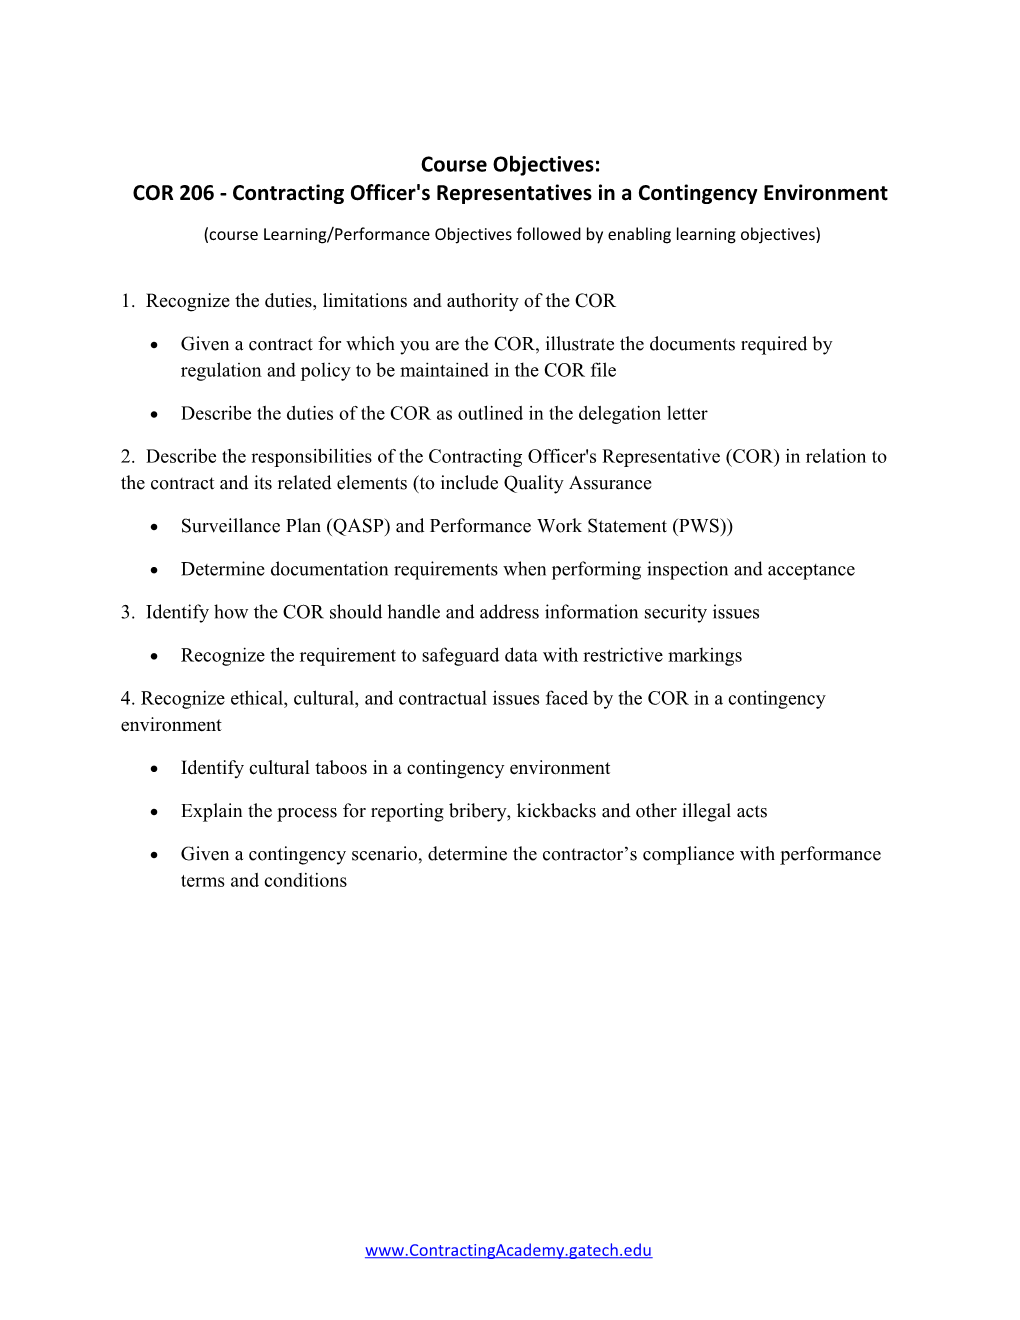 COR 206 - Contracting Officer's Representatives in a Contingency Environment